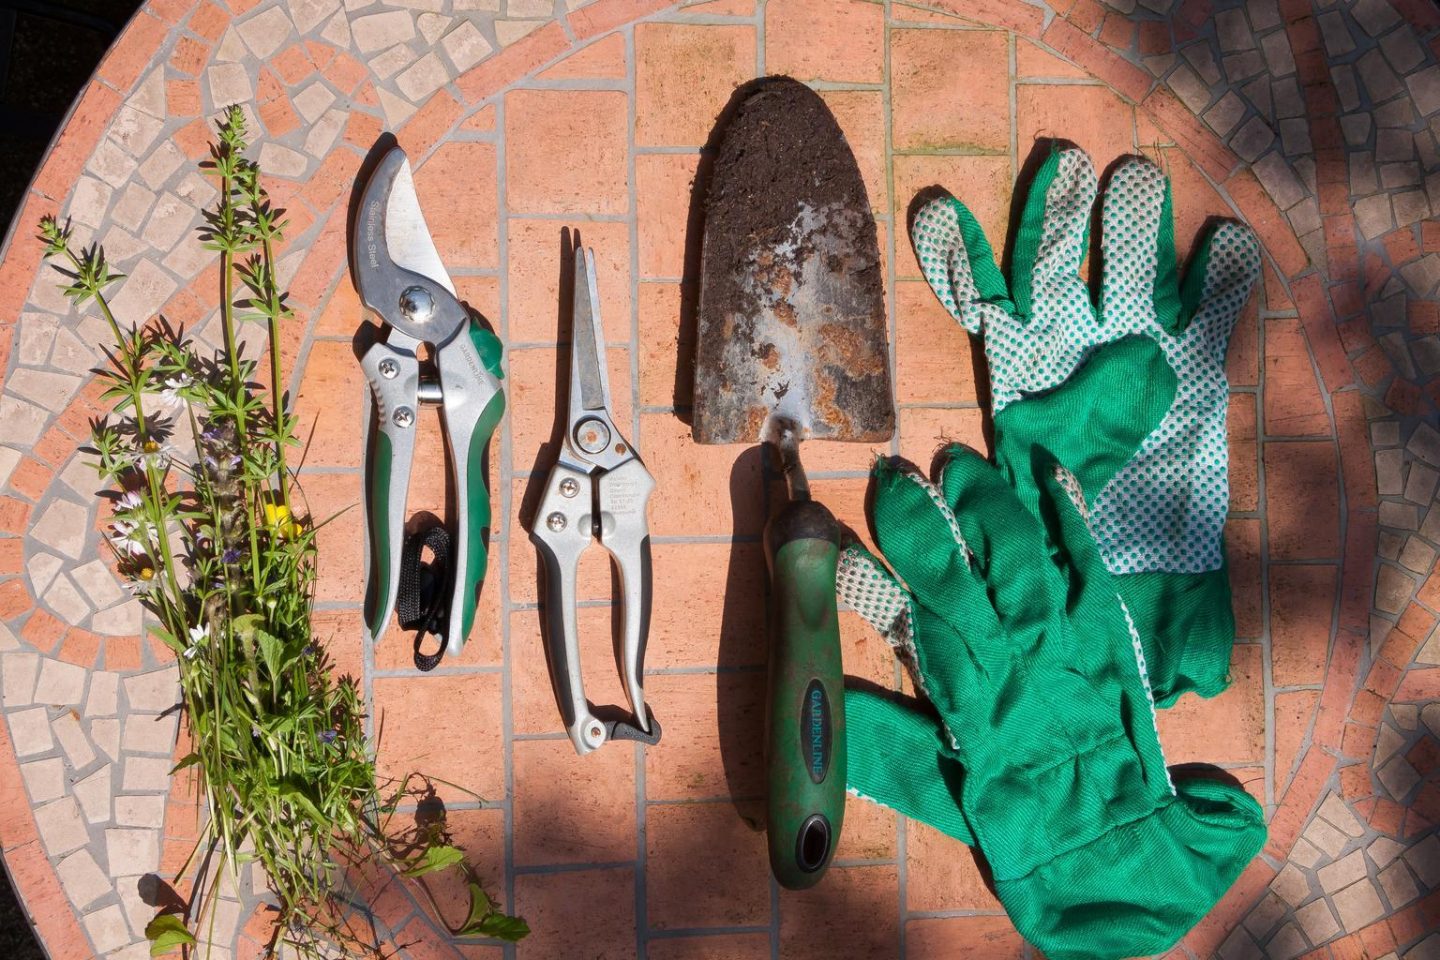 Secateurs and other tools laid out